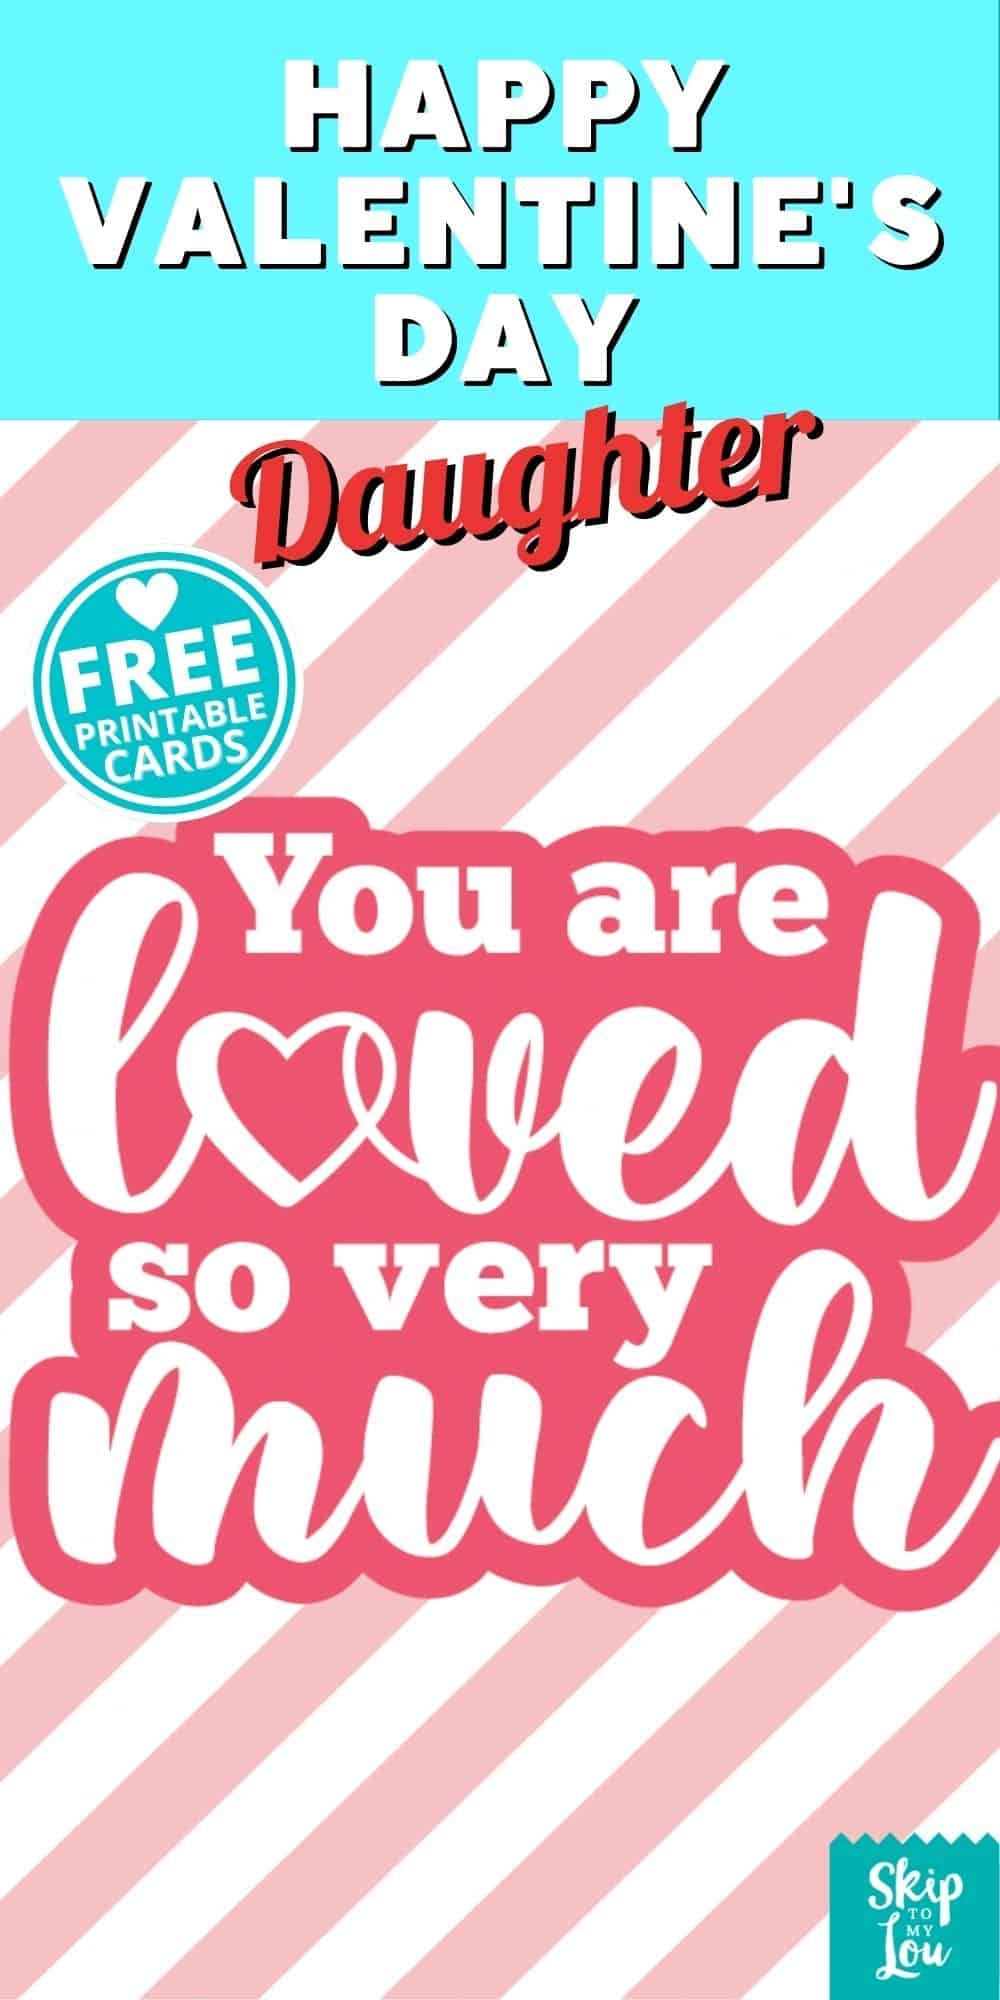 Happy Valentines Day Daughter Cards